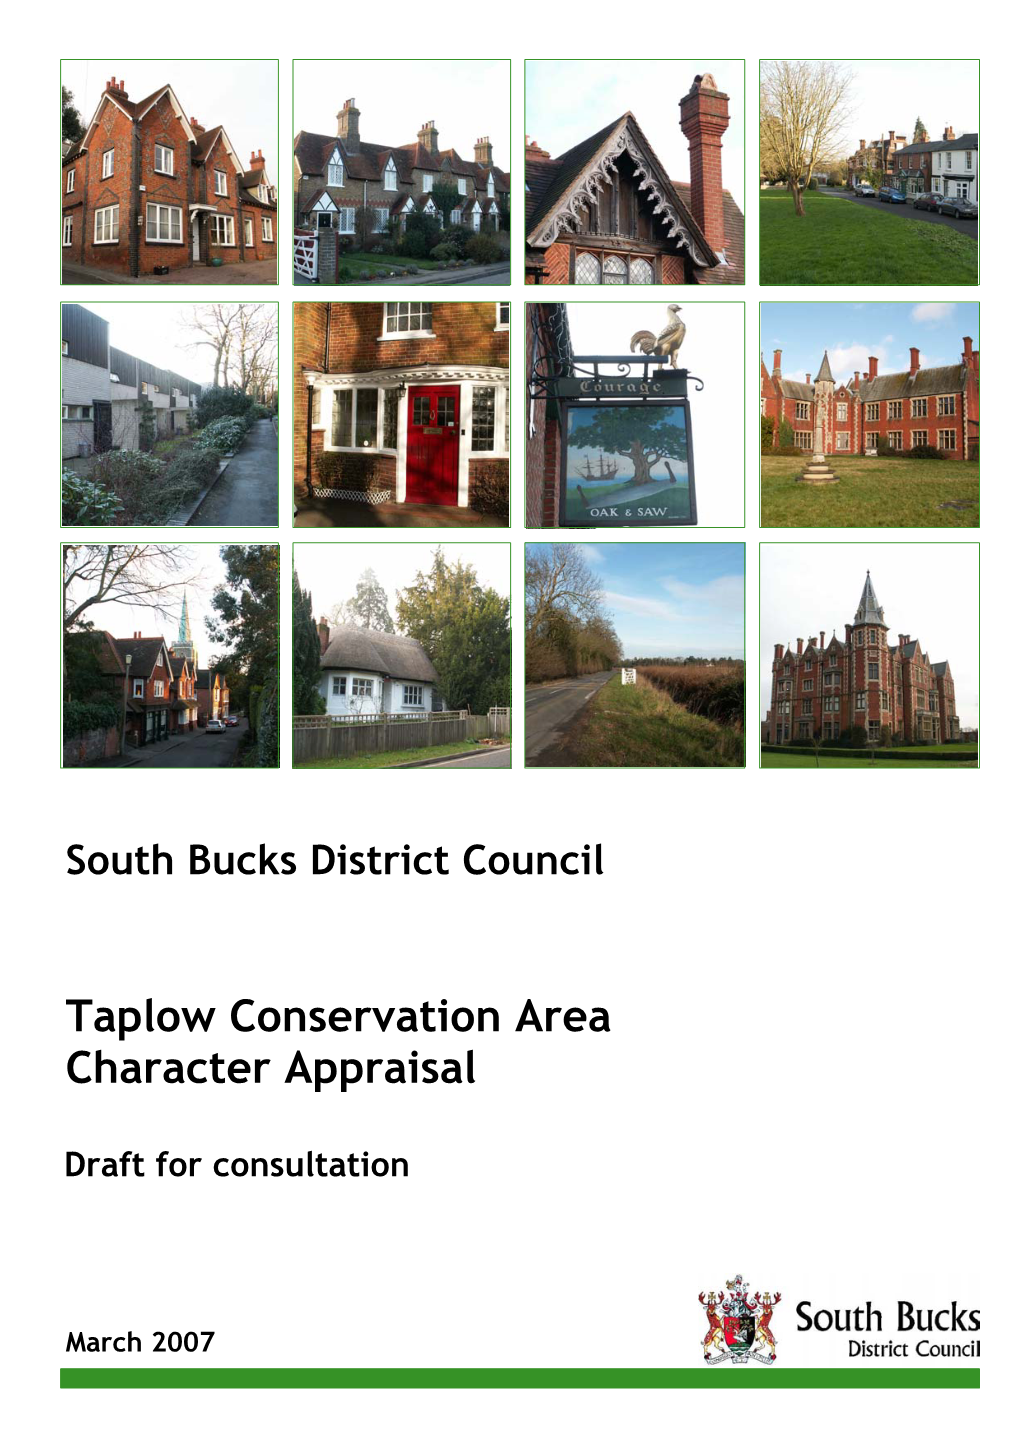 Taplow Conservation Area Character Appraisal